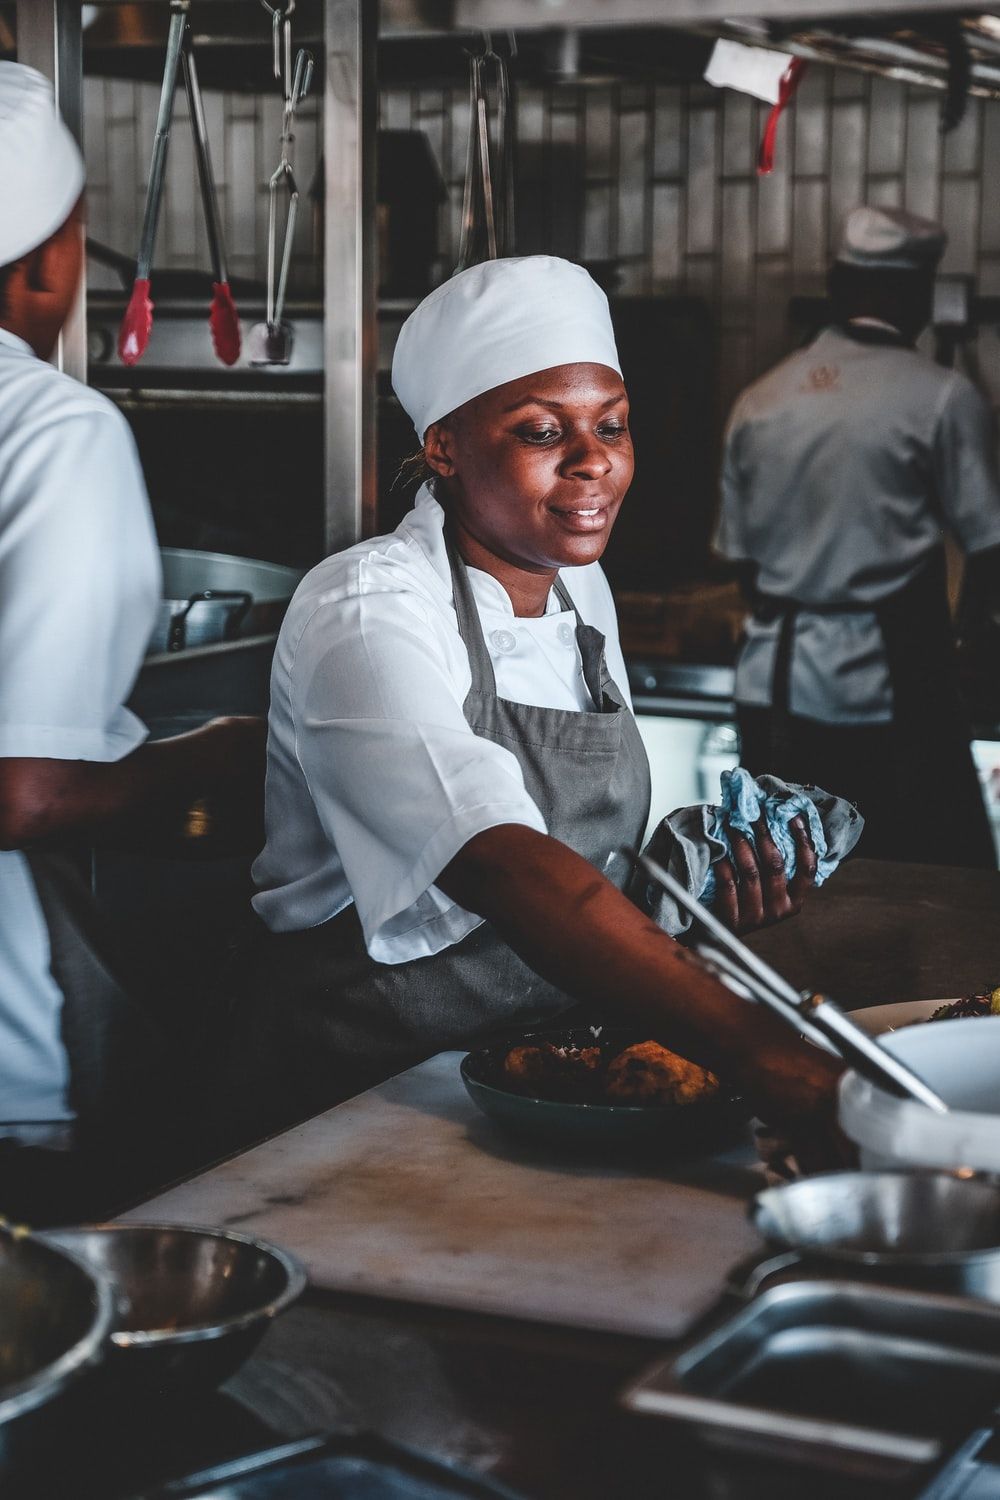 Chef Woman Picture. Download Free Image